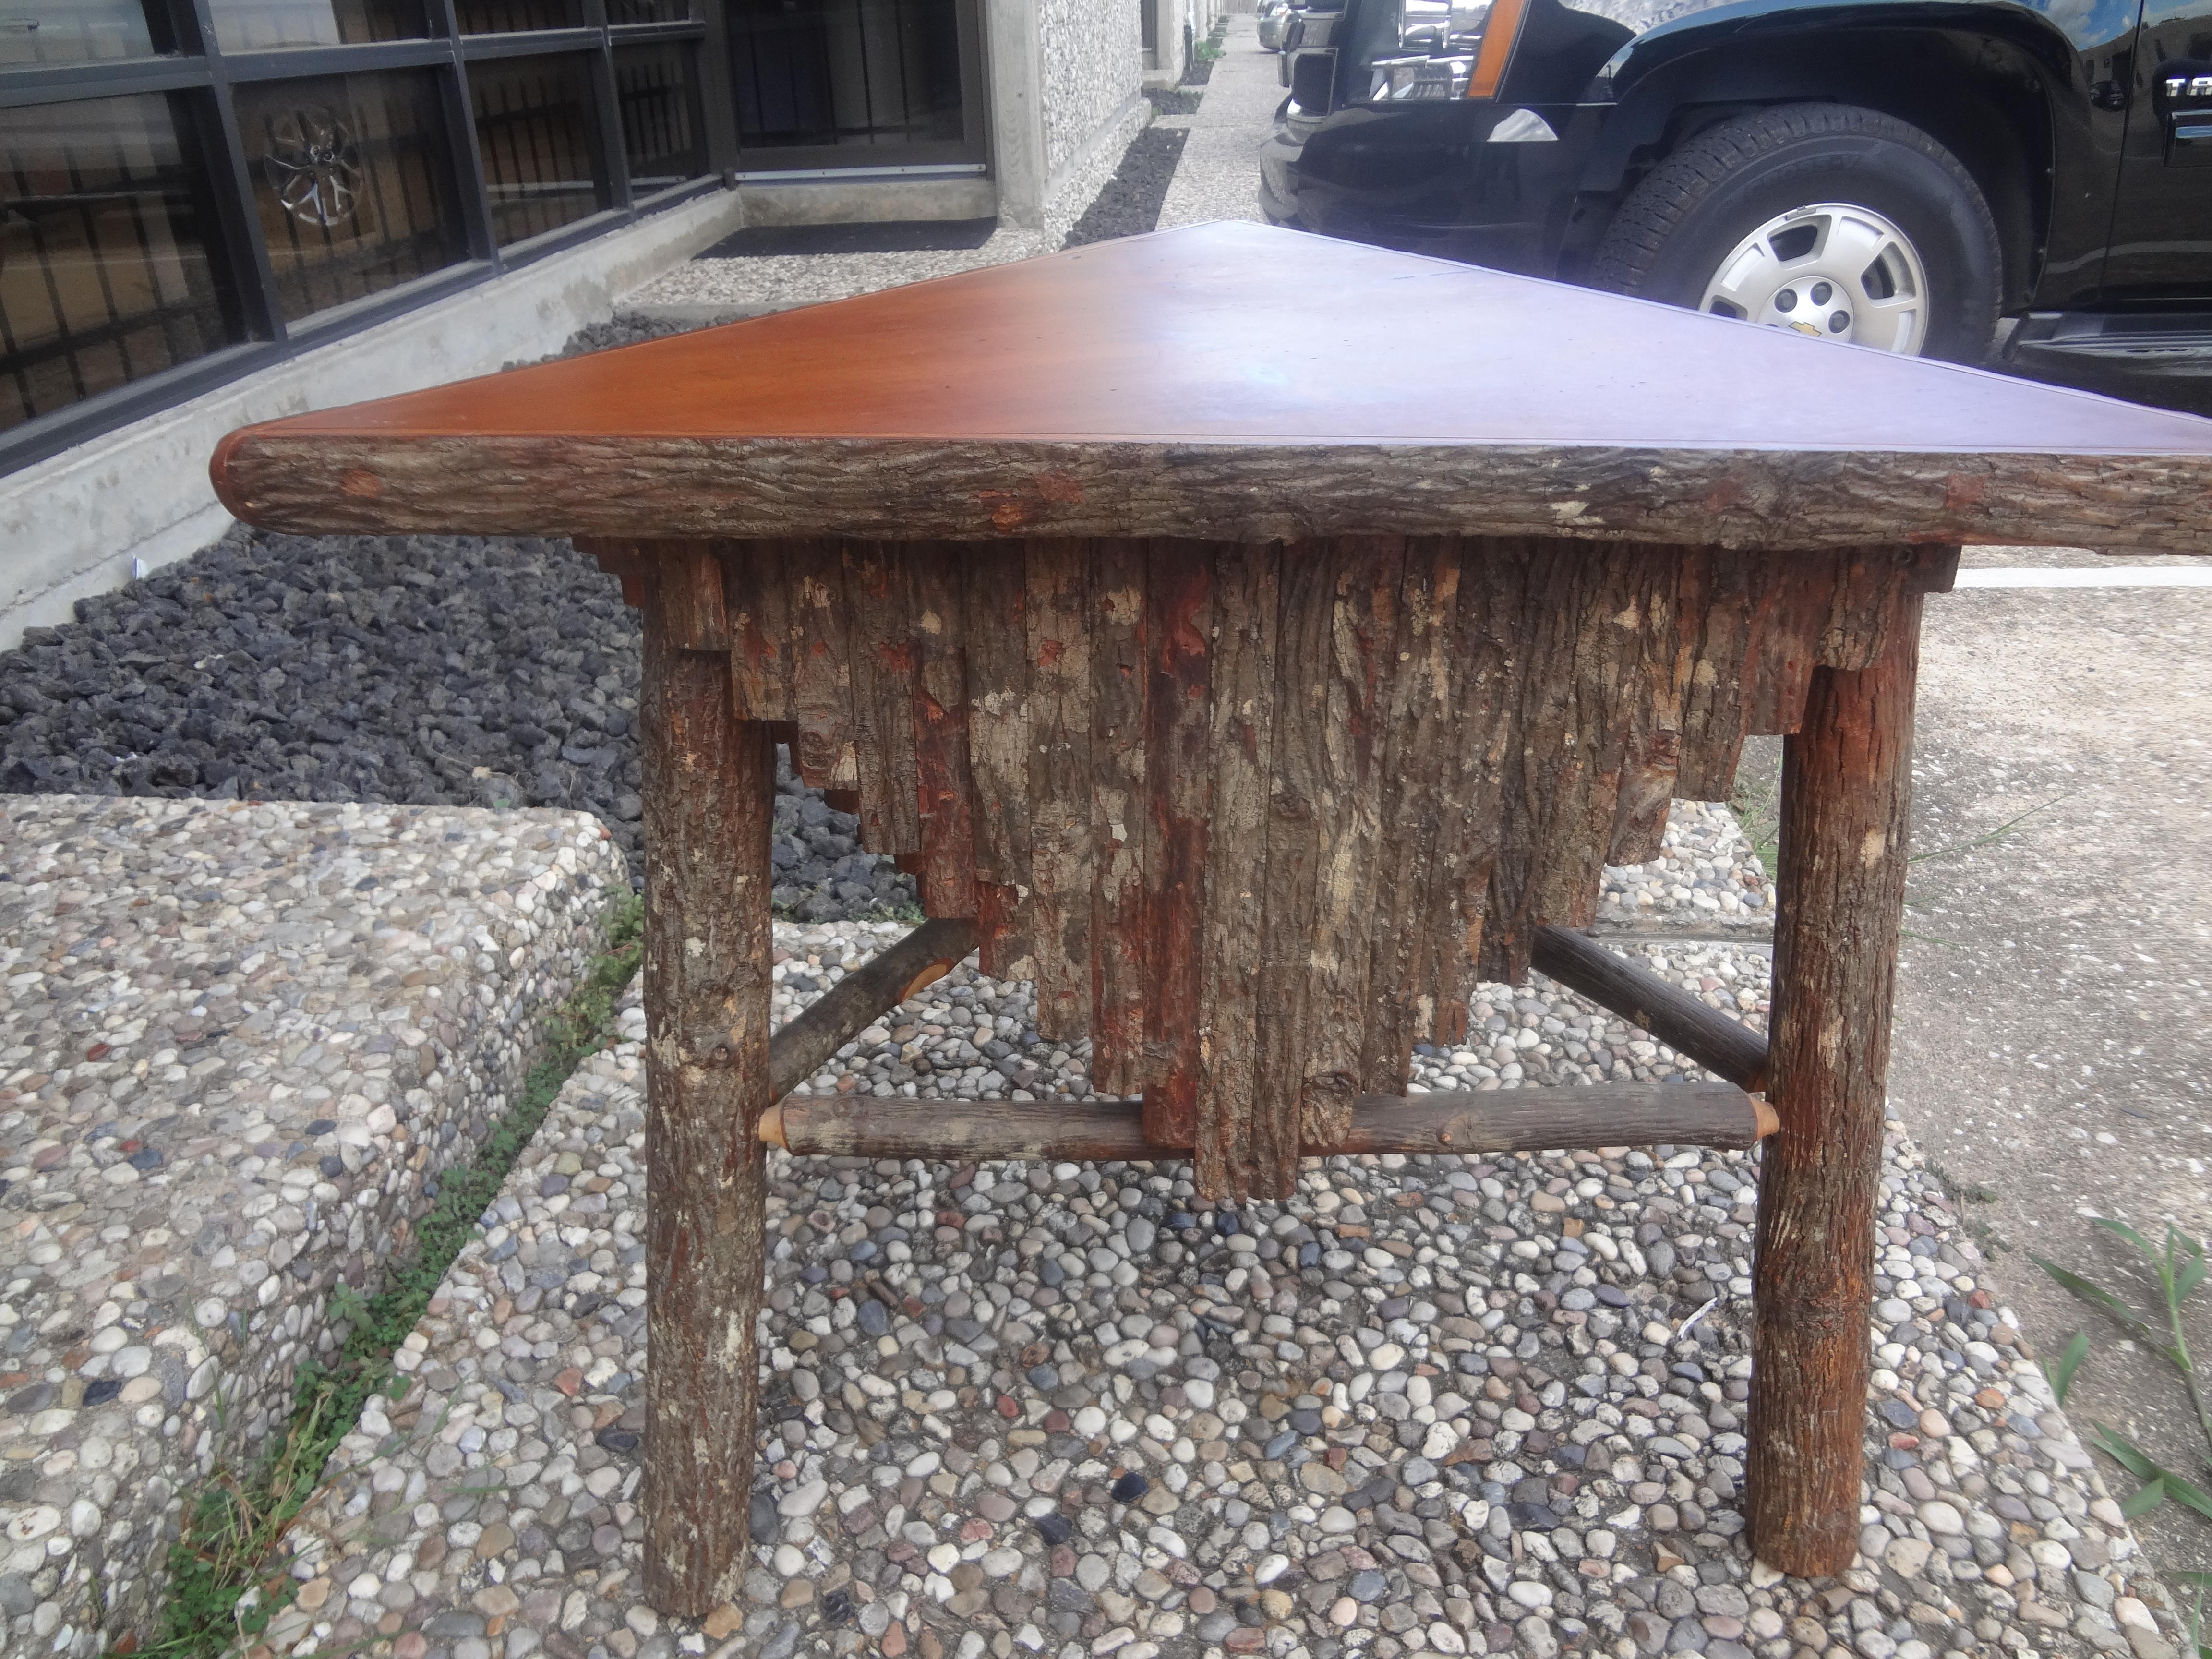 Vintage Rustic Log and Bark Table.
This stunning rustic or primitive triangular table is artisan made of logs and tree bark. 
This handsome table would work well in a rustic or primitive interior, a ranch, farm or lake house.
Beautifully crafted,